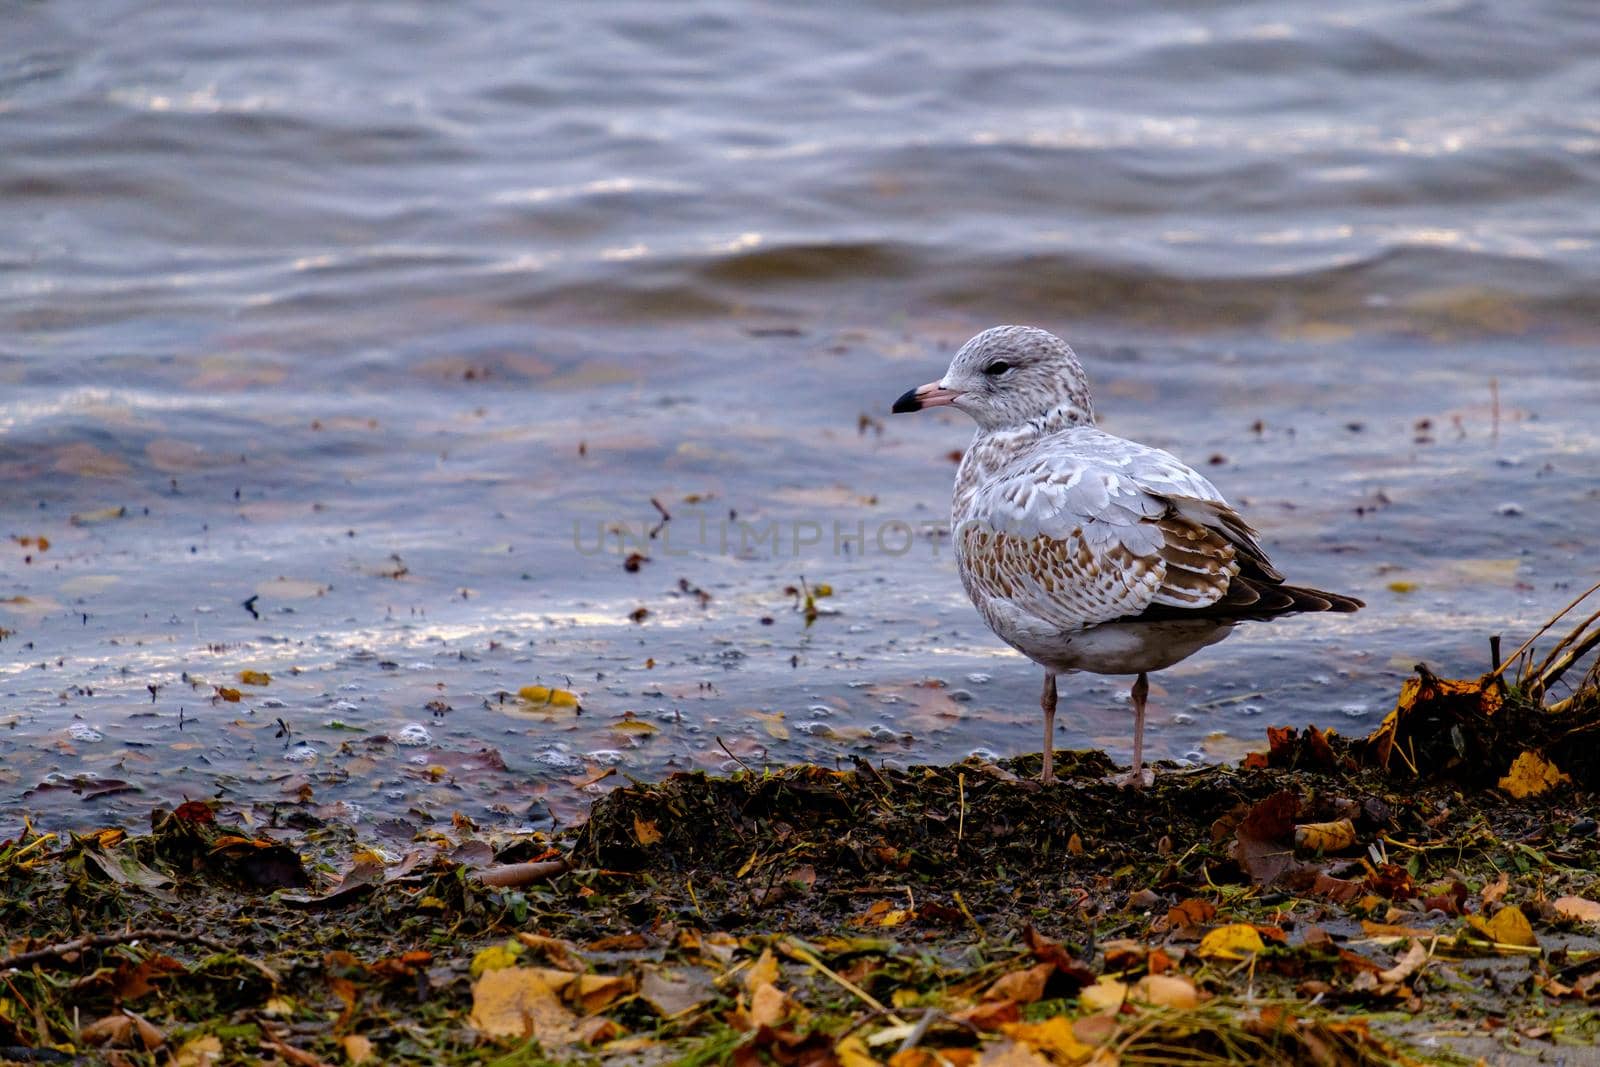 A ring-billed gull is standing on the ground on the bank of a river. The seagull's feet rest upon the dirt, surrounded by muck and leaves, as gentle waves roll in from the water.